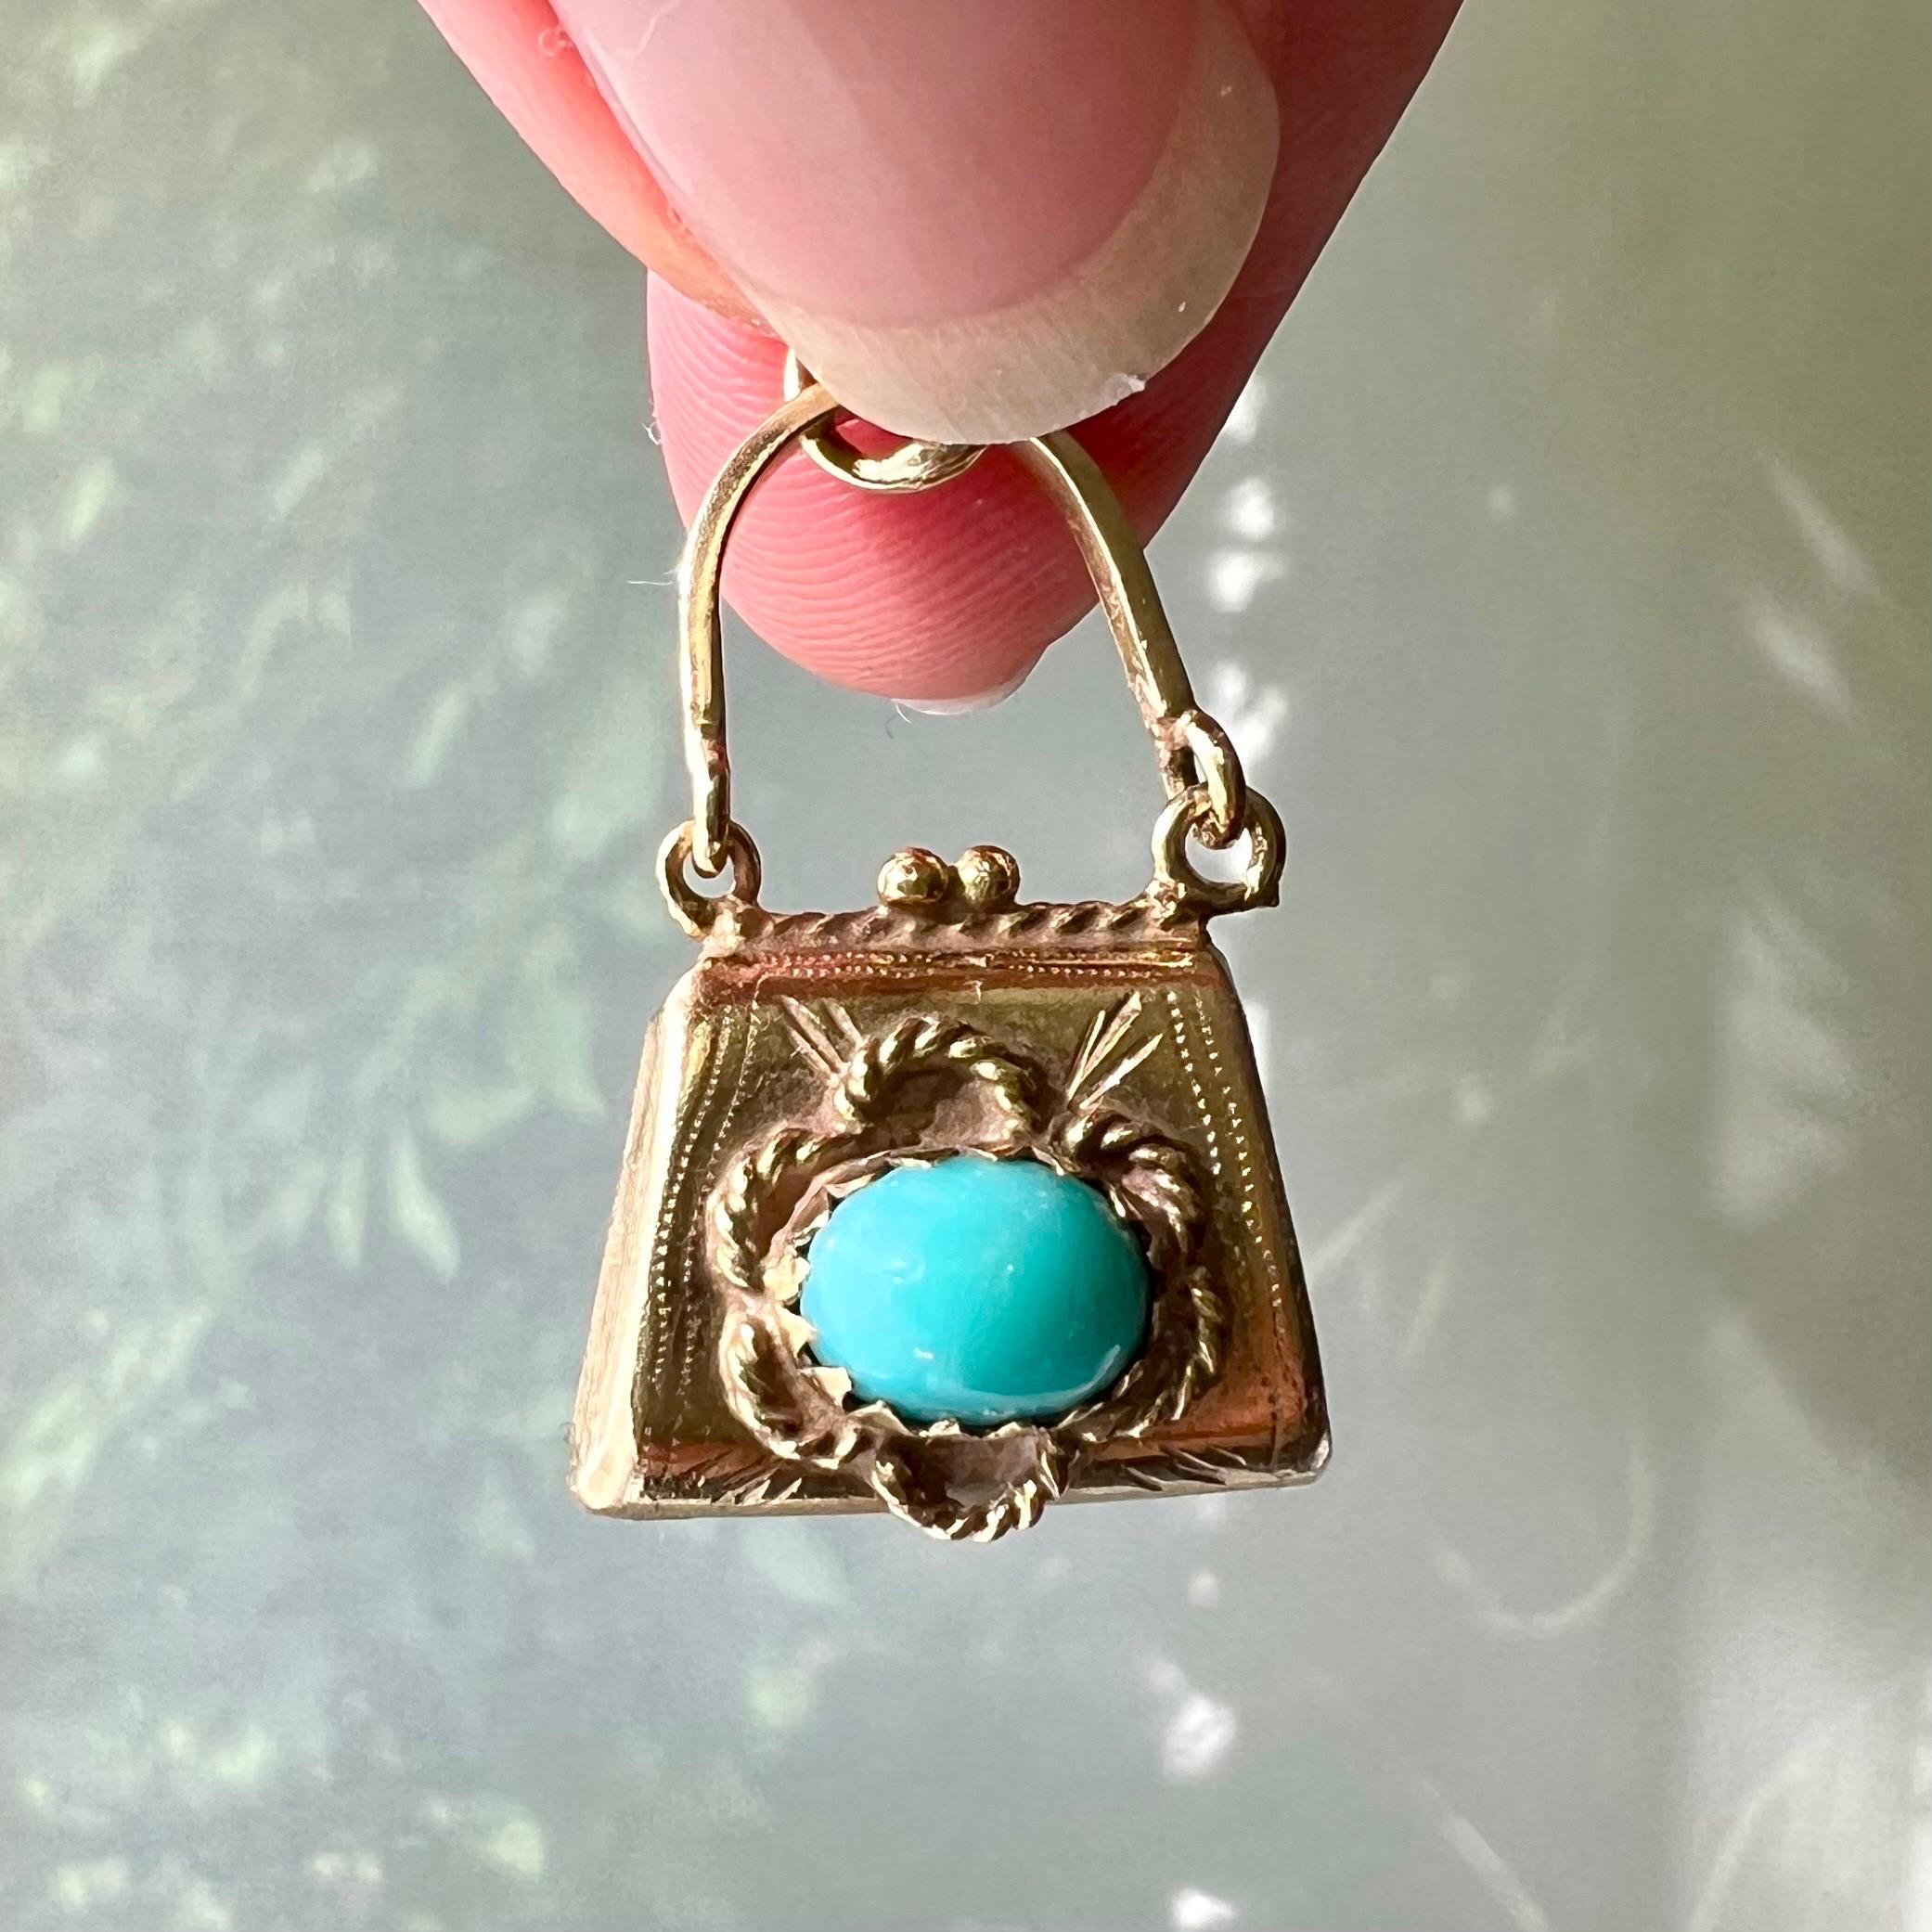 A lovely vintage purse charm pendant created in 14 karat gold and set with turquoise stones. The gold purse is beautifully designed with two oval turquoise stones on each side and the gold is created with matted satined gold on the sides. The purse